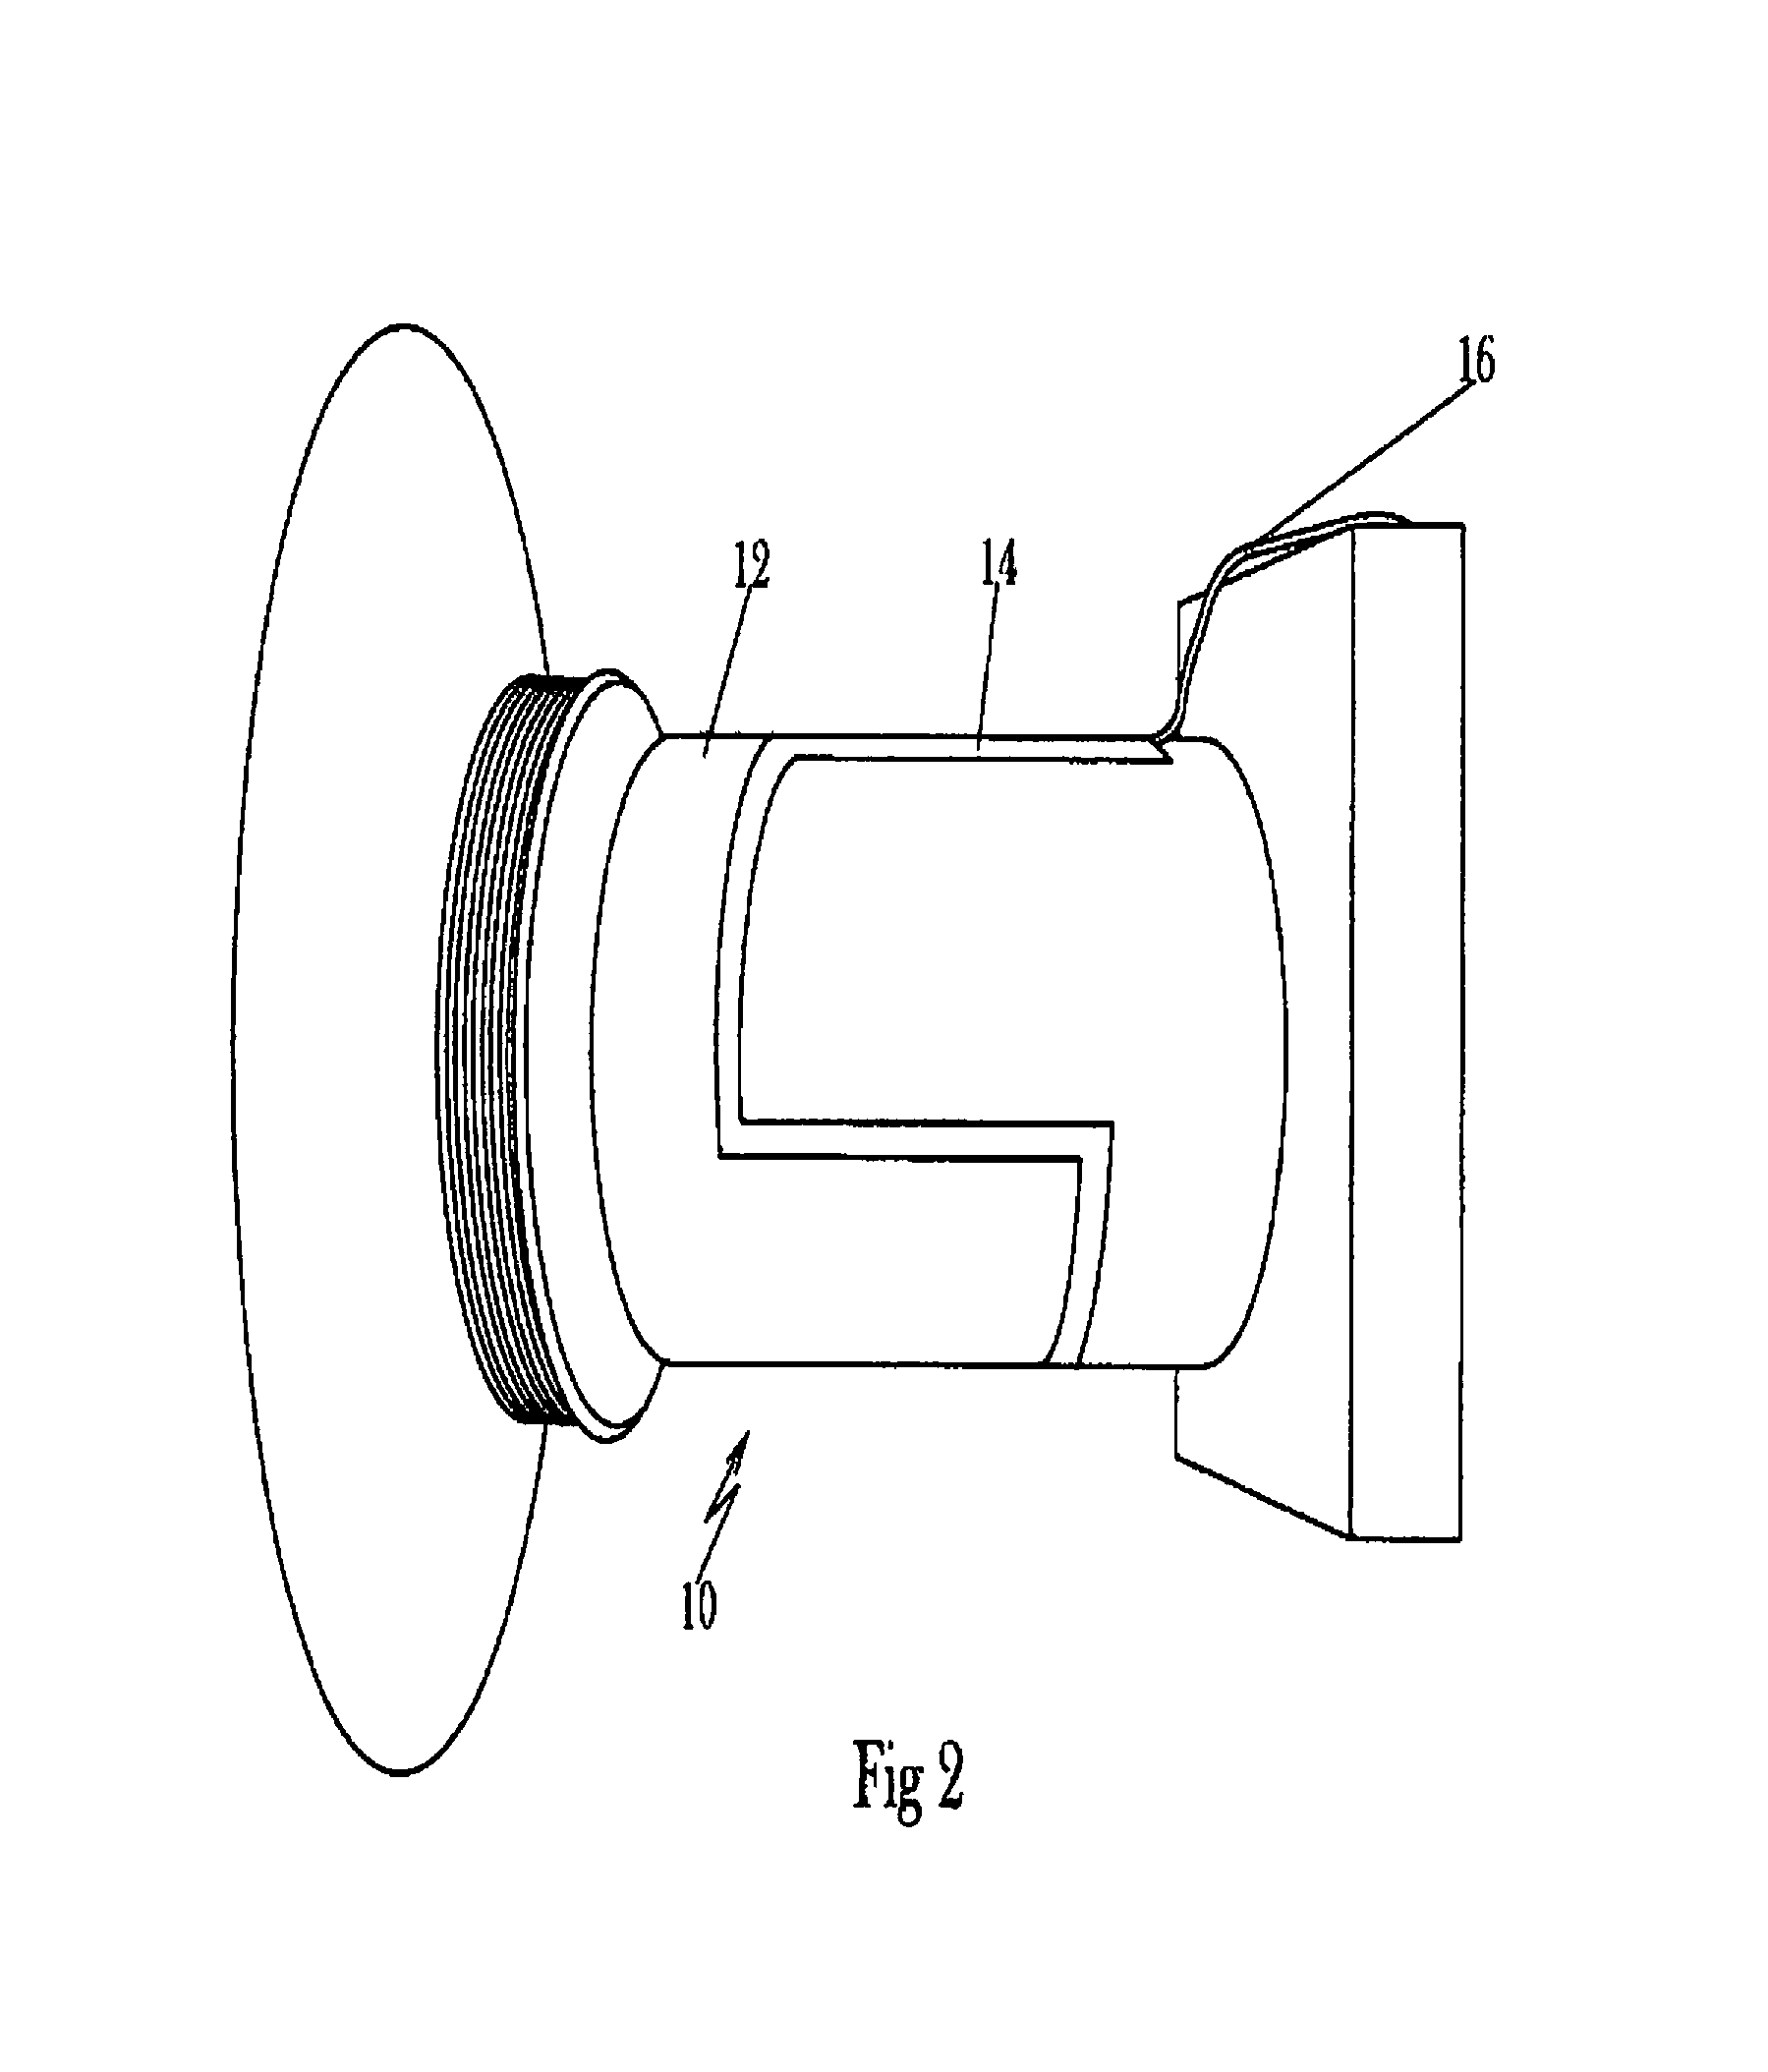 Apparatus to Monitor Flow Assurance Properties in Conduits